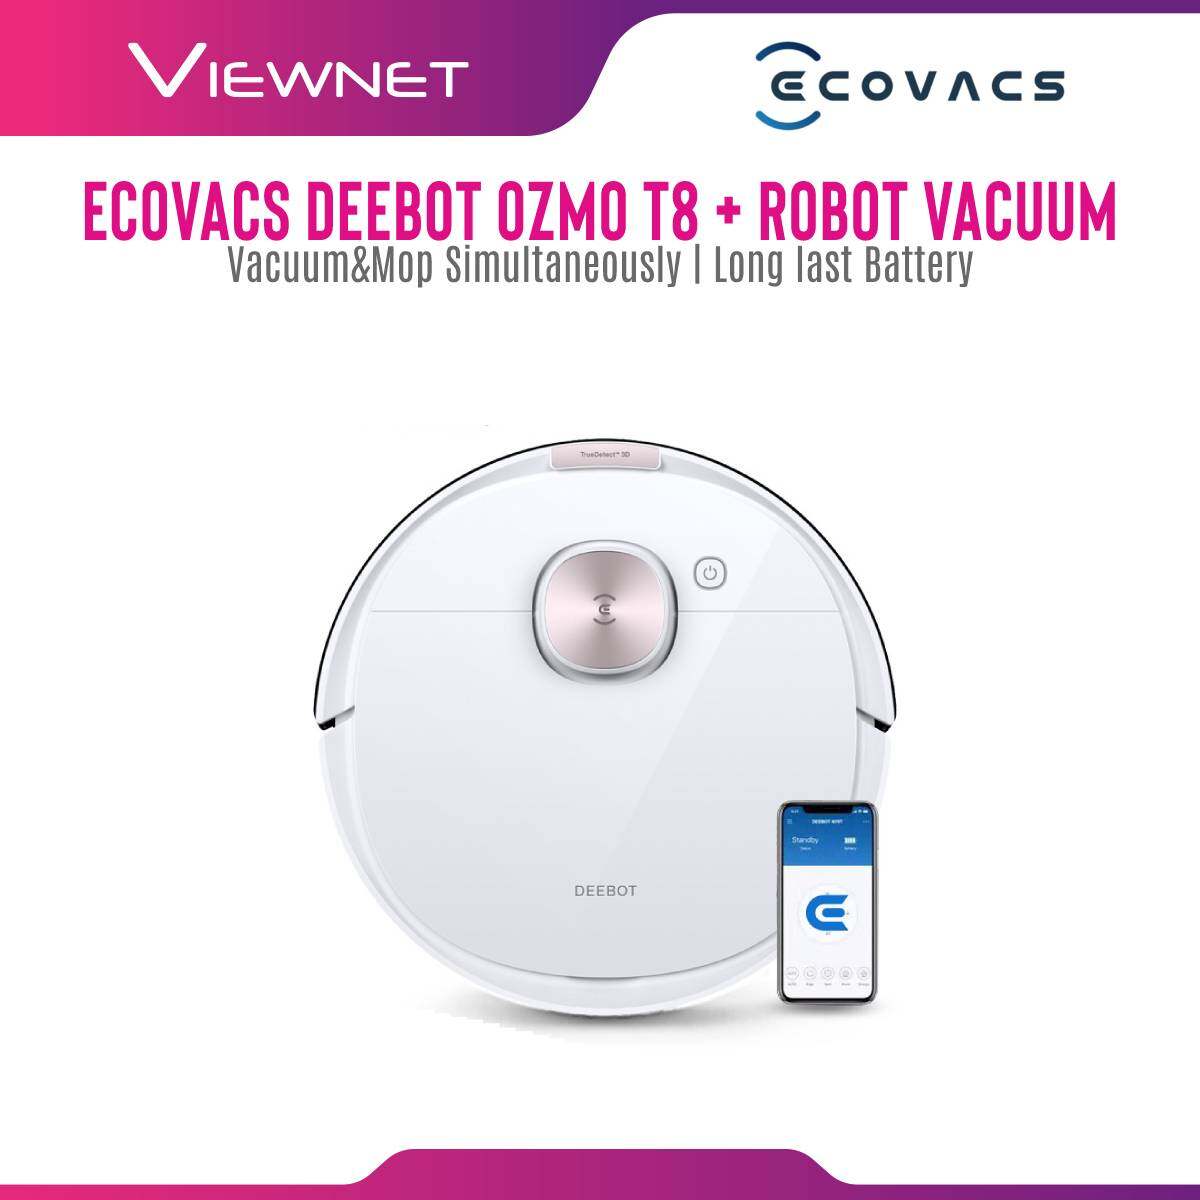 ECOVACS DEEBOT OZMO T8+ Robot Vacuum Cleaner withã€Auto-Empty Dustbinã€‘OZMO Mopping Technology 180min Working time Intelligent Robotic Vacuum and Mop Vacuum [Local Shipping & 1 Year Warranty]